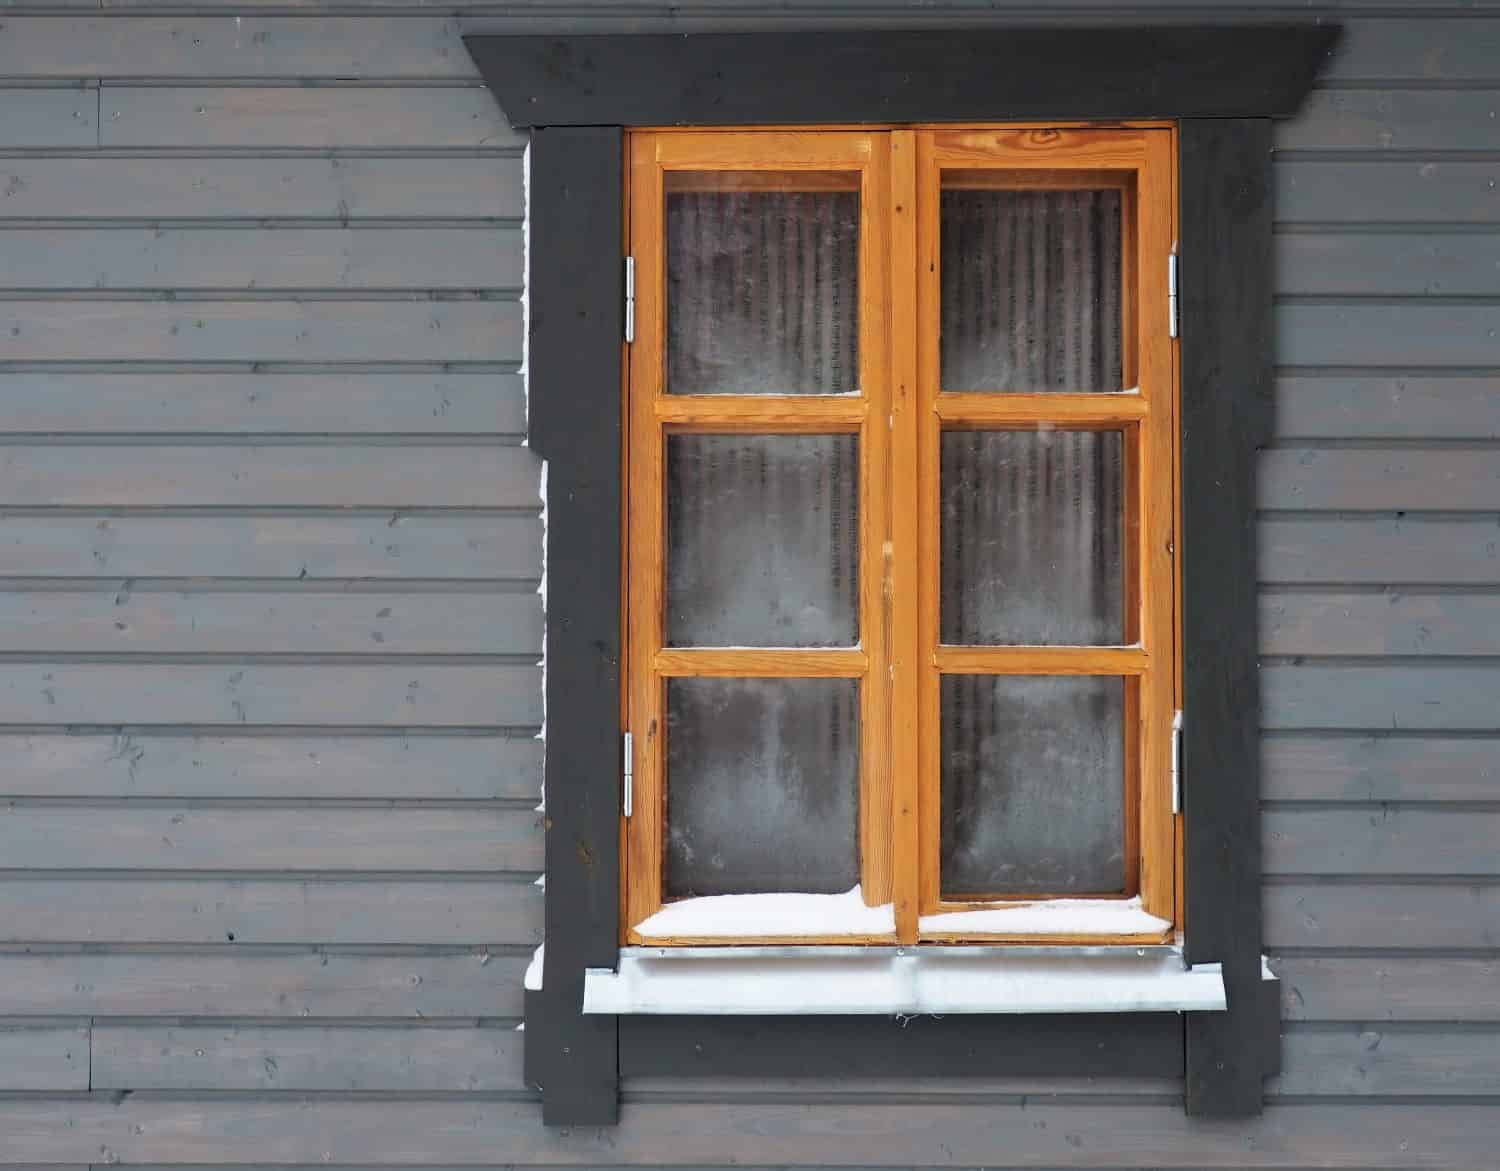 Wooden window of the house in winter. Details of rural buildings. Weather forecast in winter